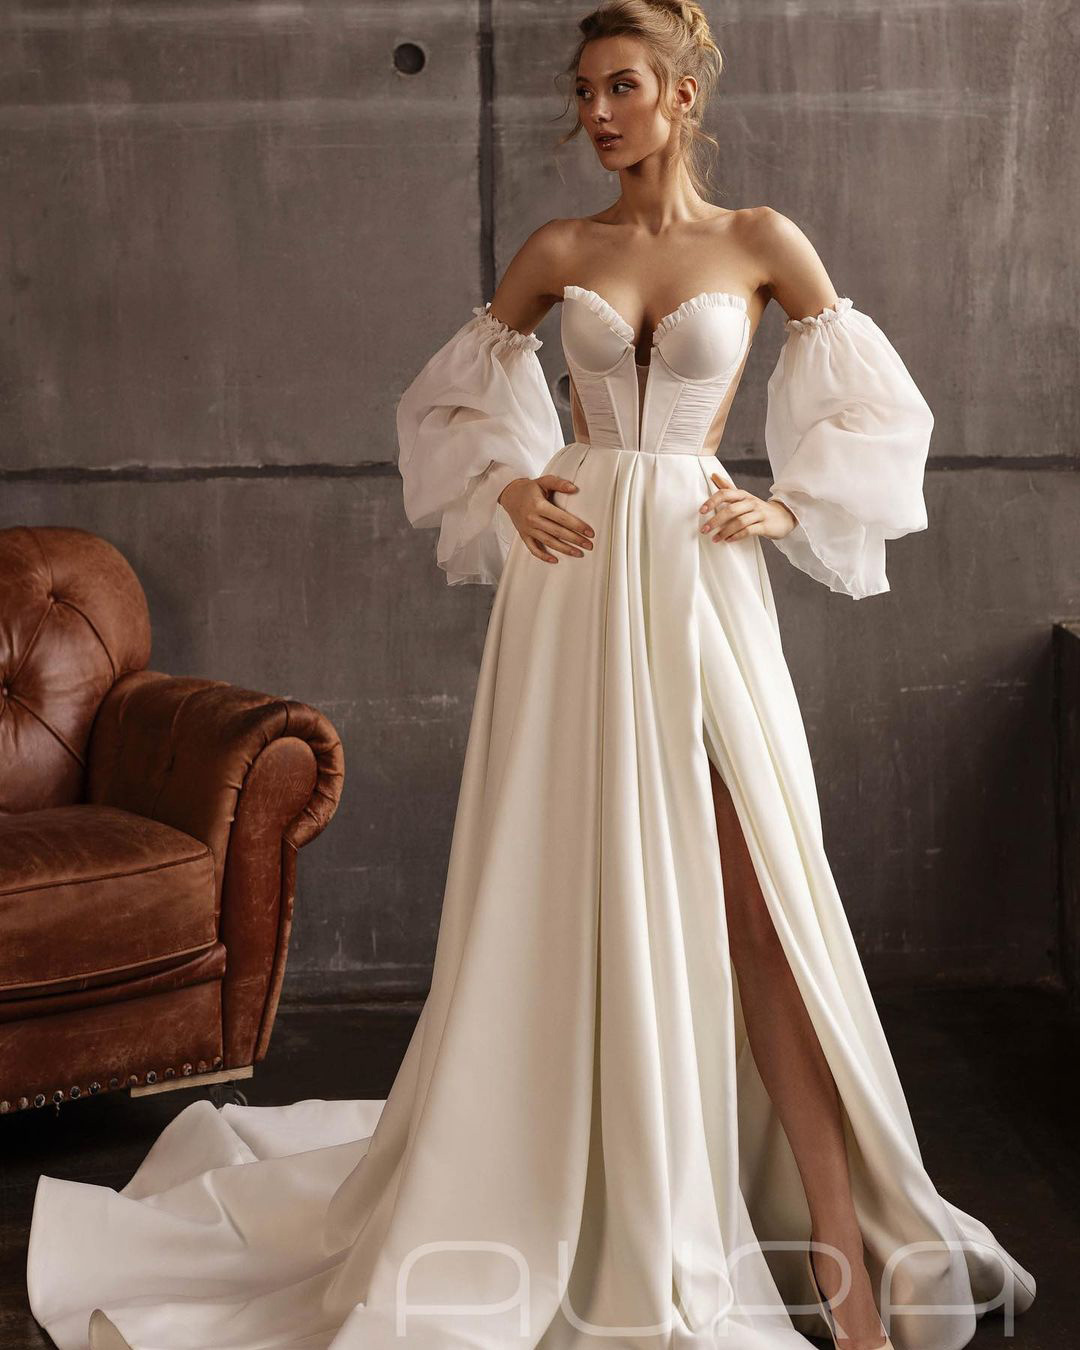 sexy wedding dresses ideas simple off the shoulder with sleeves alexveil